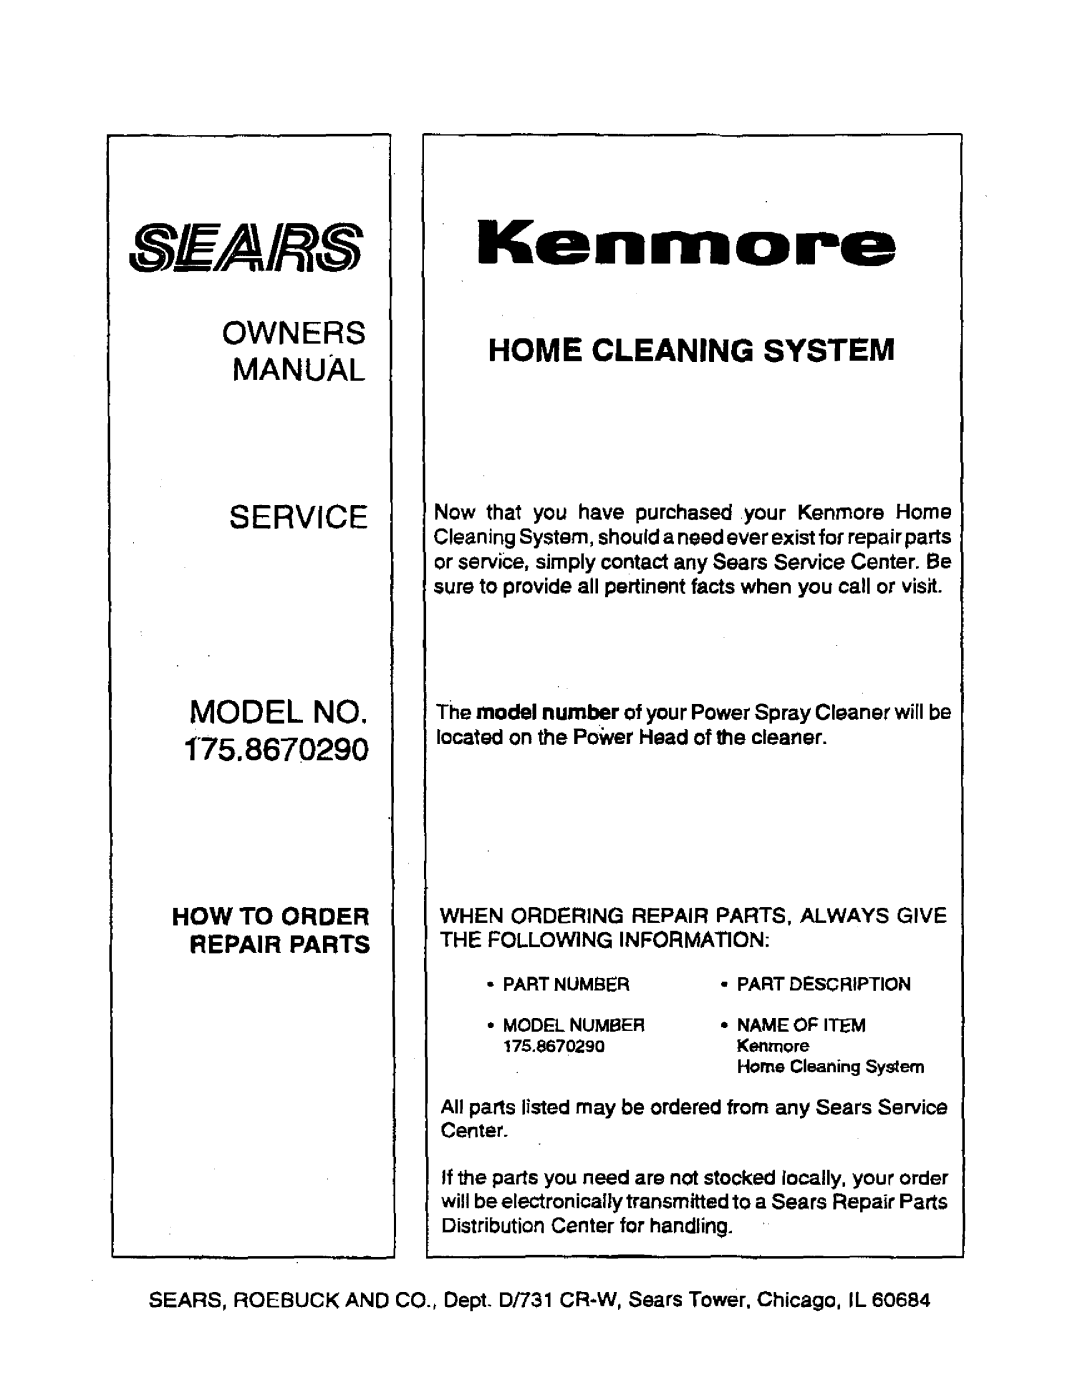 Sears OWNERS MANUAL SERVICE MODEL NO 175.8670290, Home Cleaning System, How To Order Repair Parts, Sears, Kenmore 